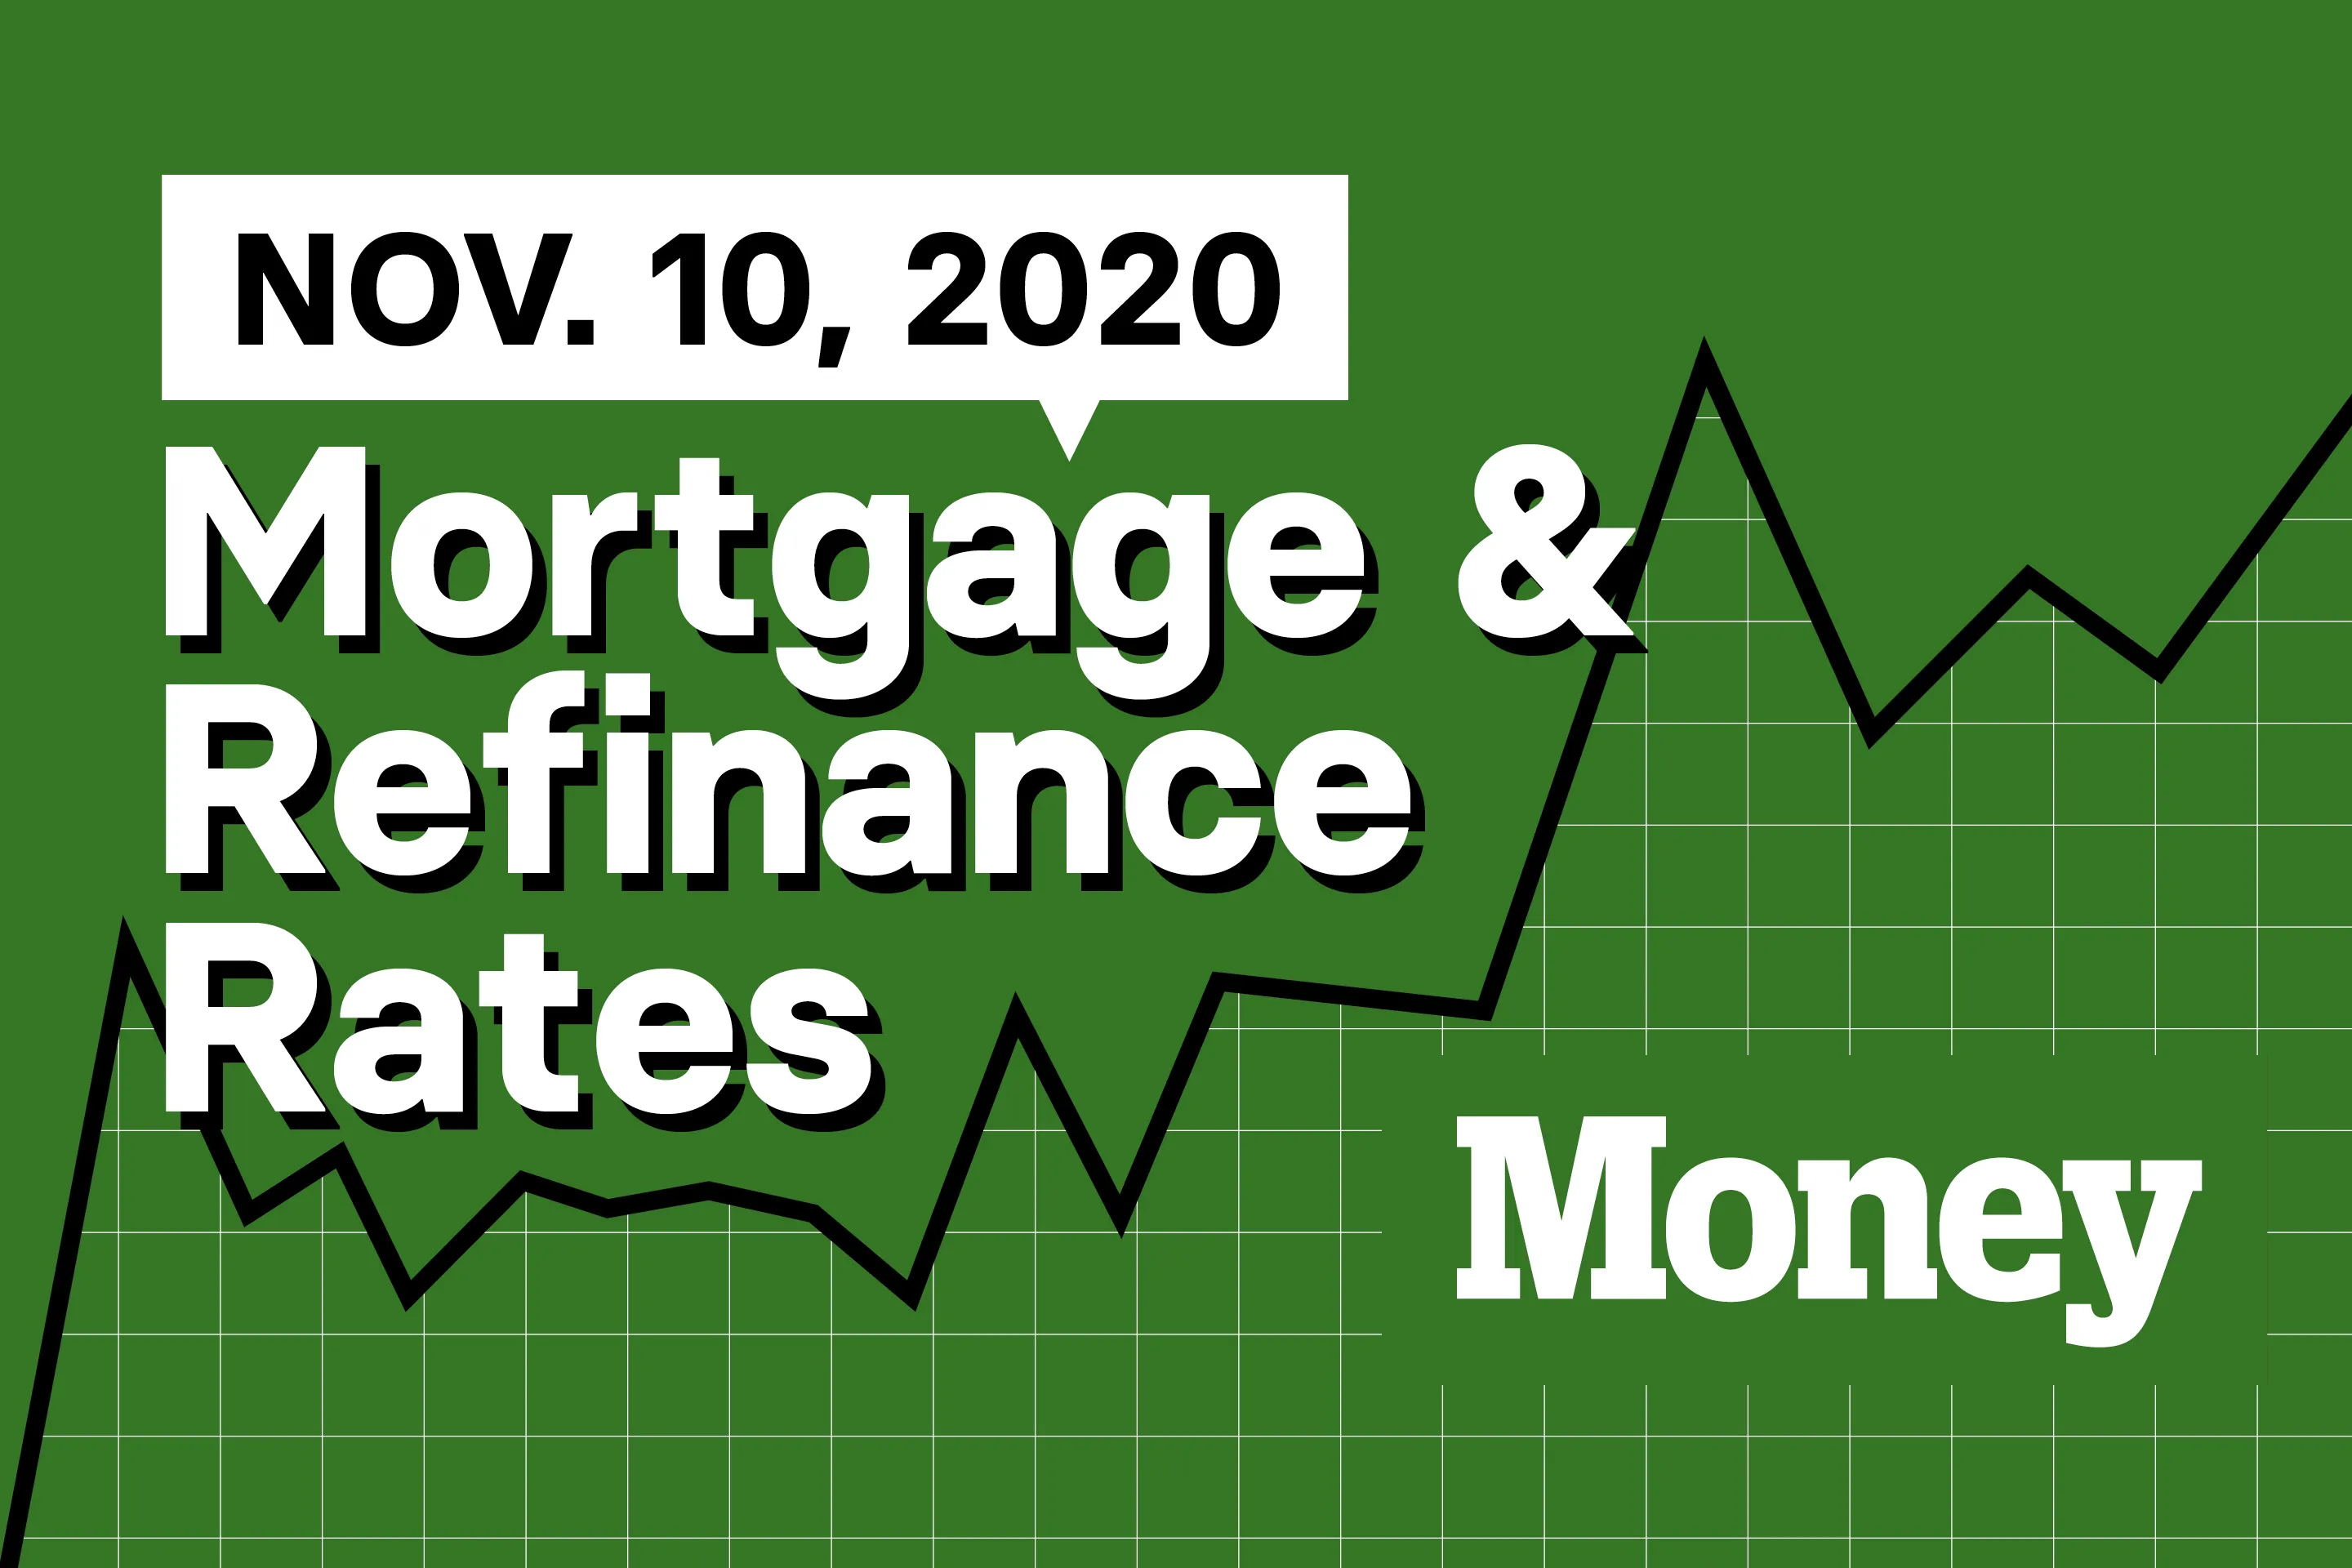 Here Are Today's Best Mortgage & Refinance Rates for November 10, 2020